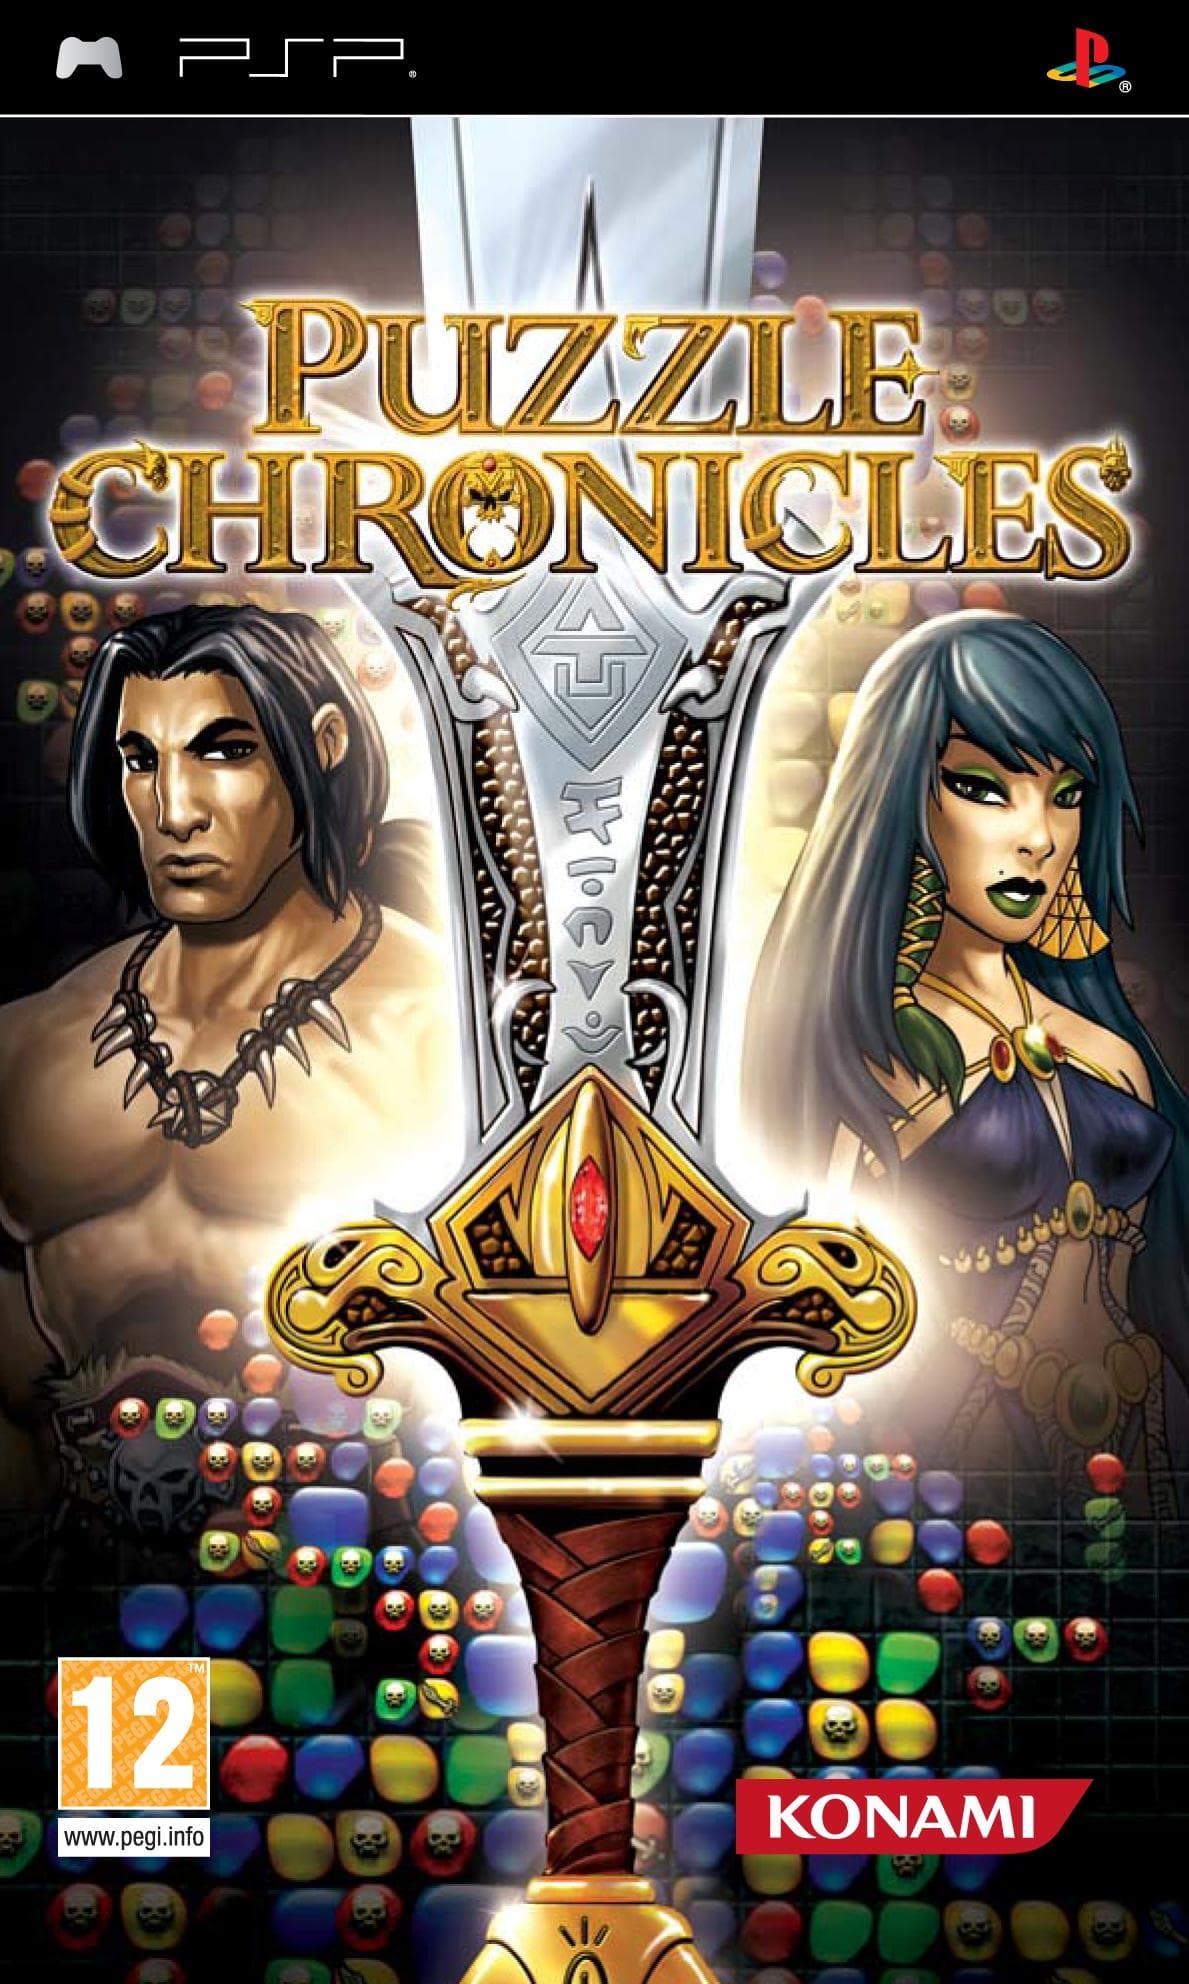 Puzzle Chronicles for psp 